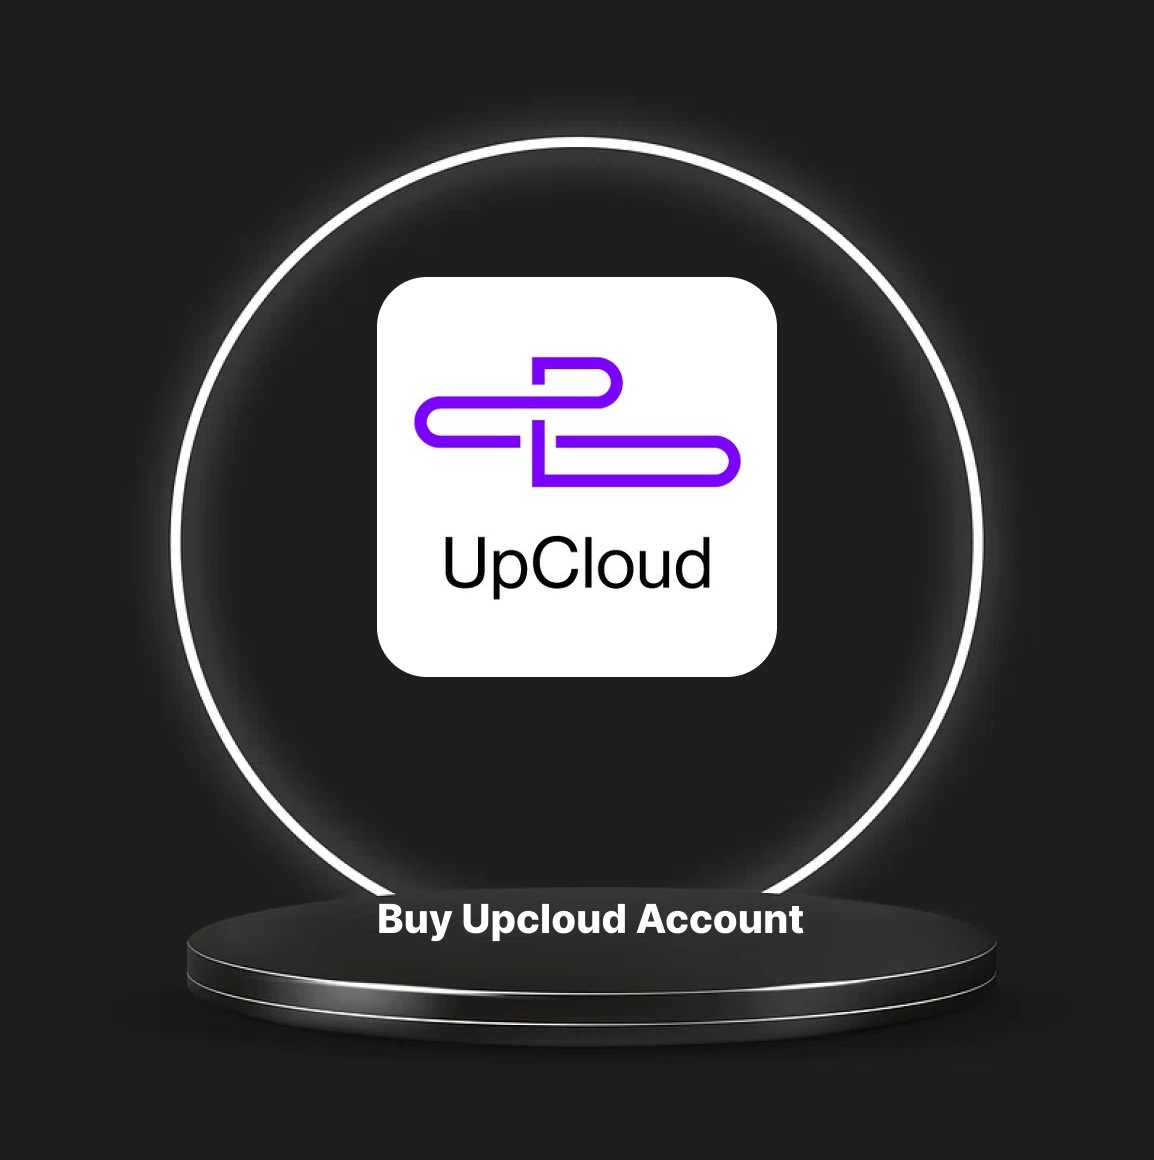 Buy Upcloud Account - Verified Cloud Account For Sale